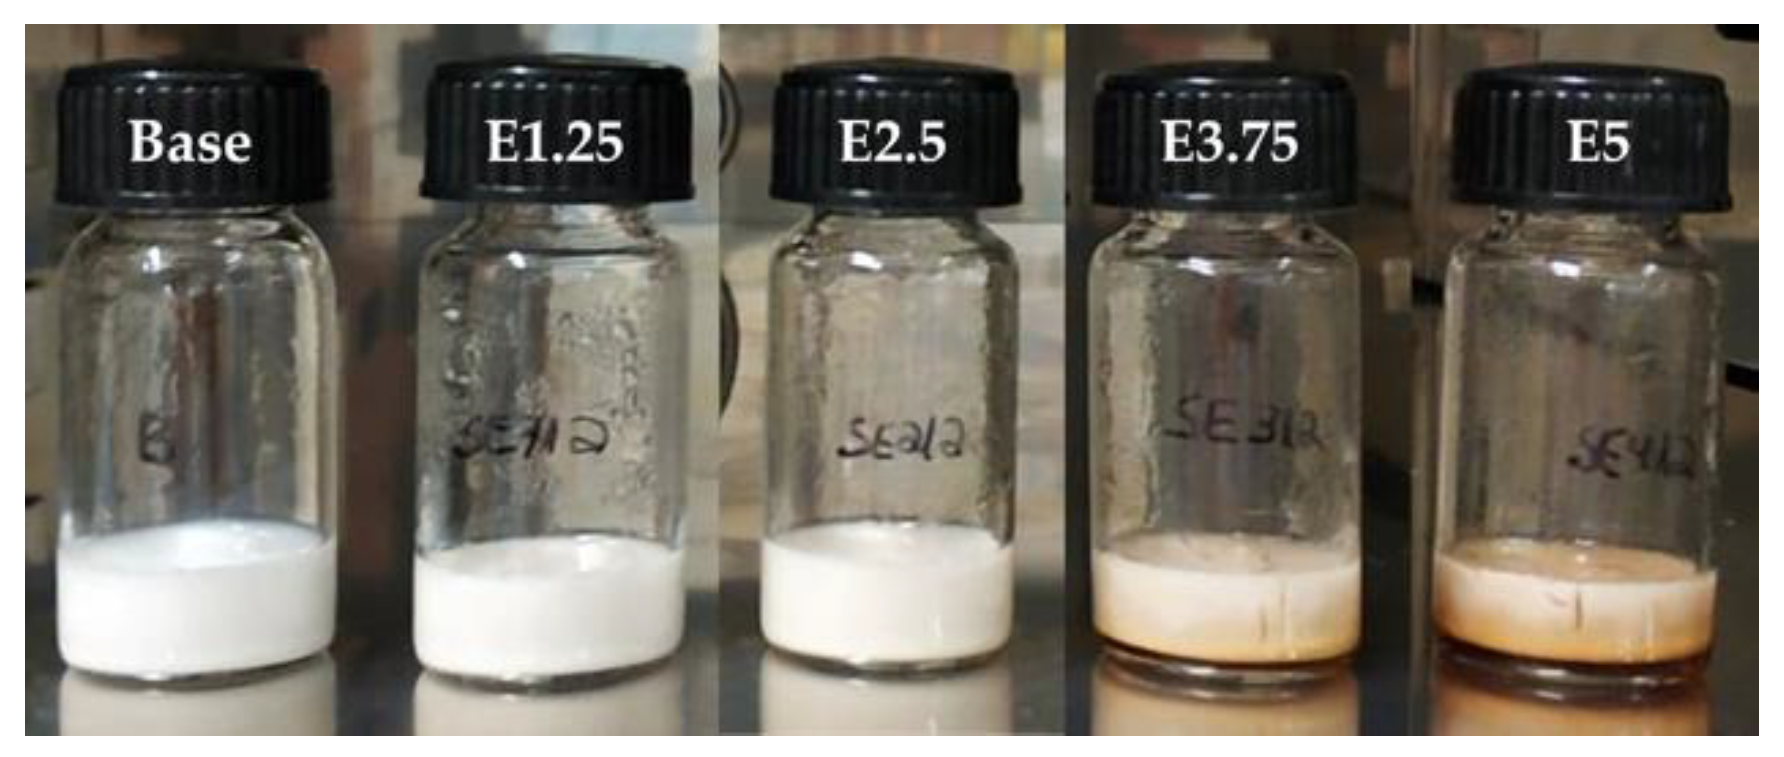 an example of an oil in water emulsion is